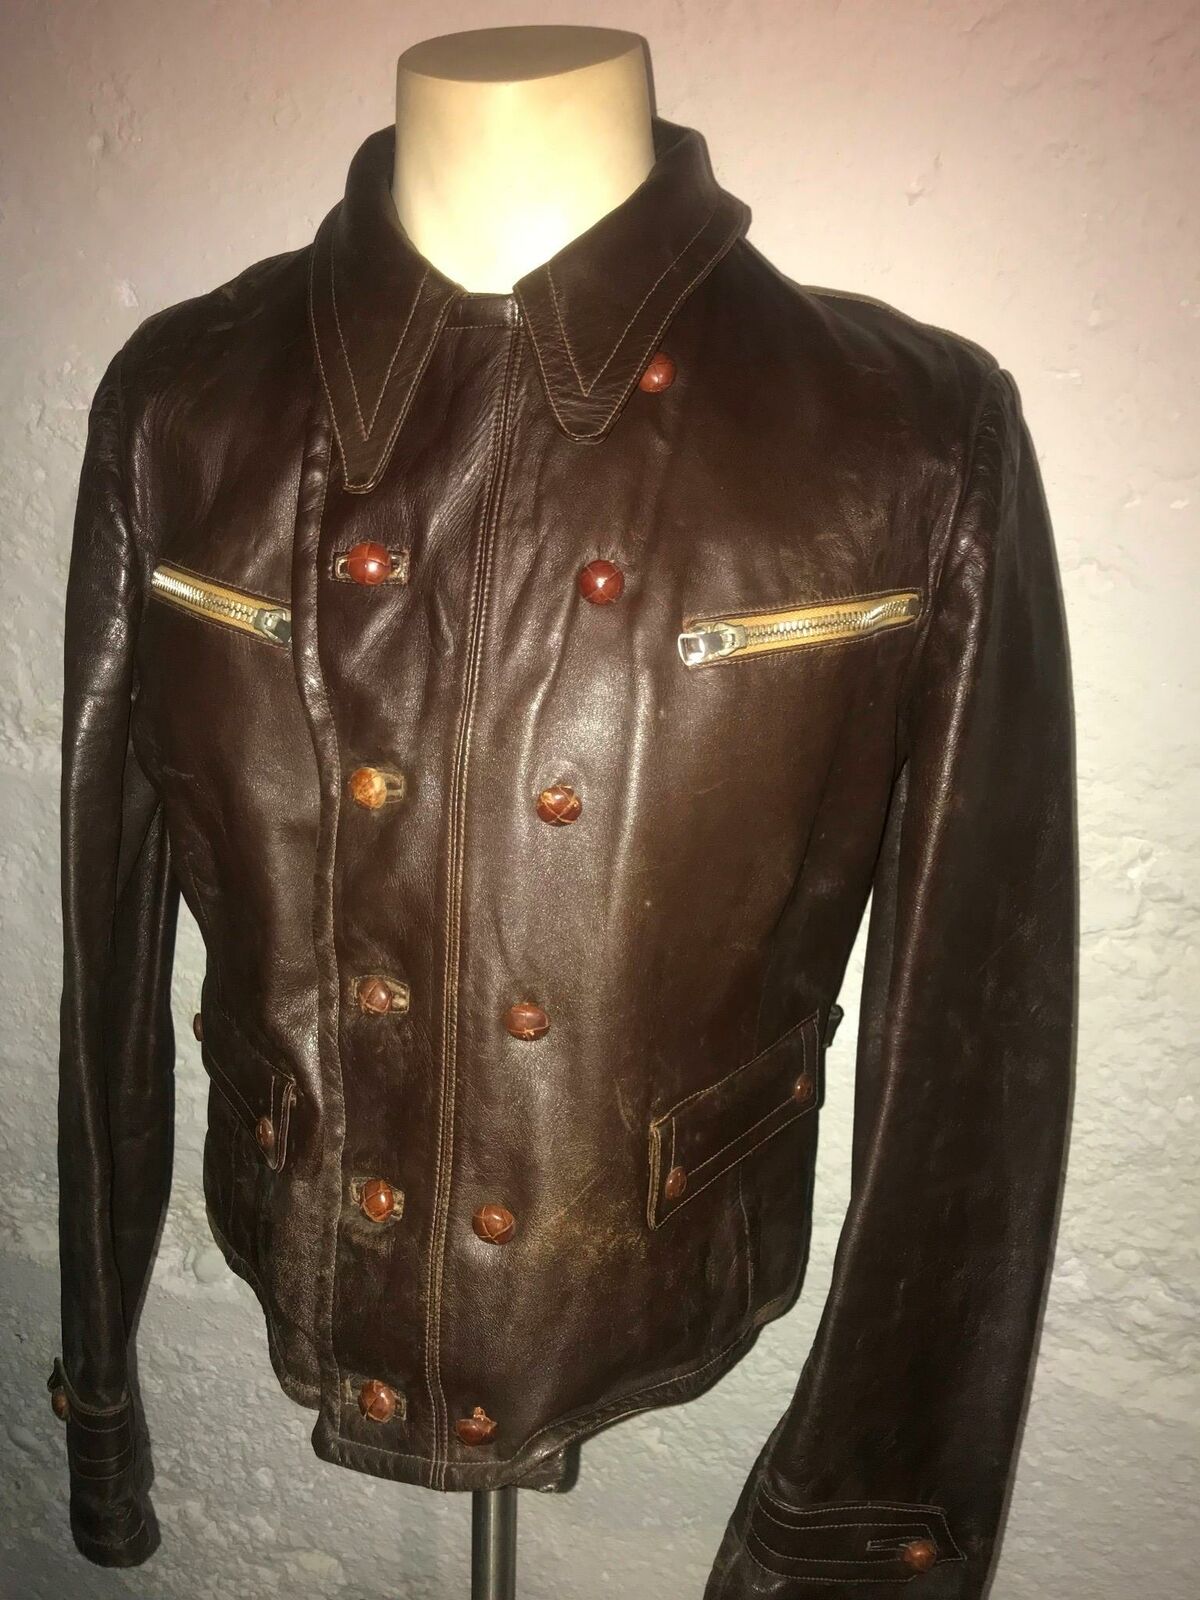 VTG WWII STYLE BROWN GERMAN PILOT CYCLIST LEATHER MOTORCYCLE LUFTWAFFE JACKET